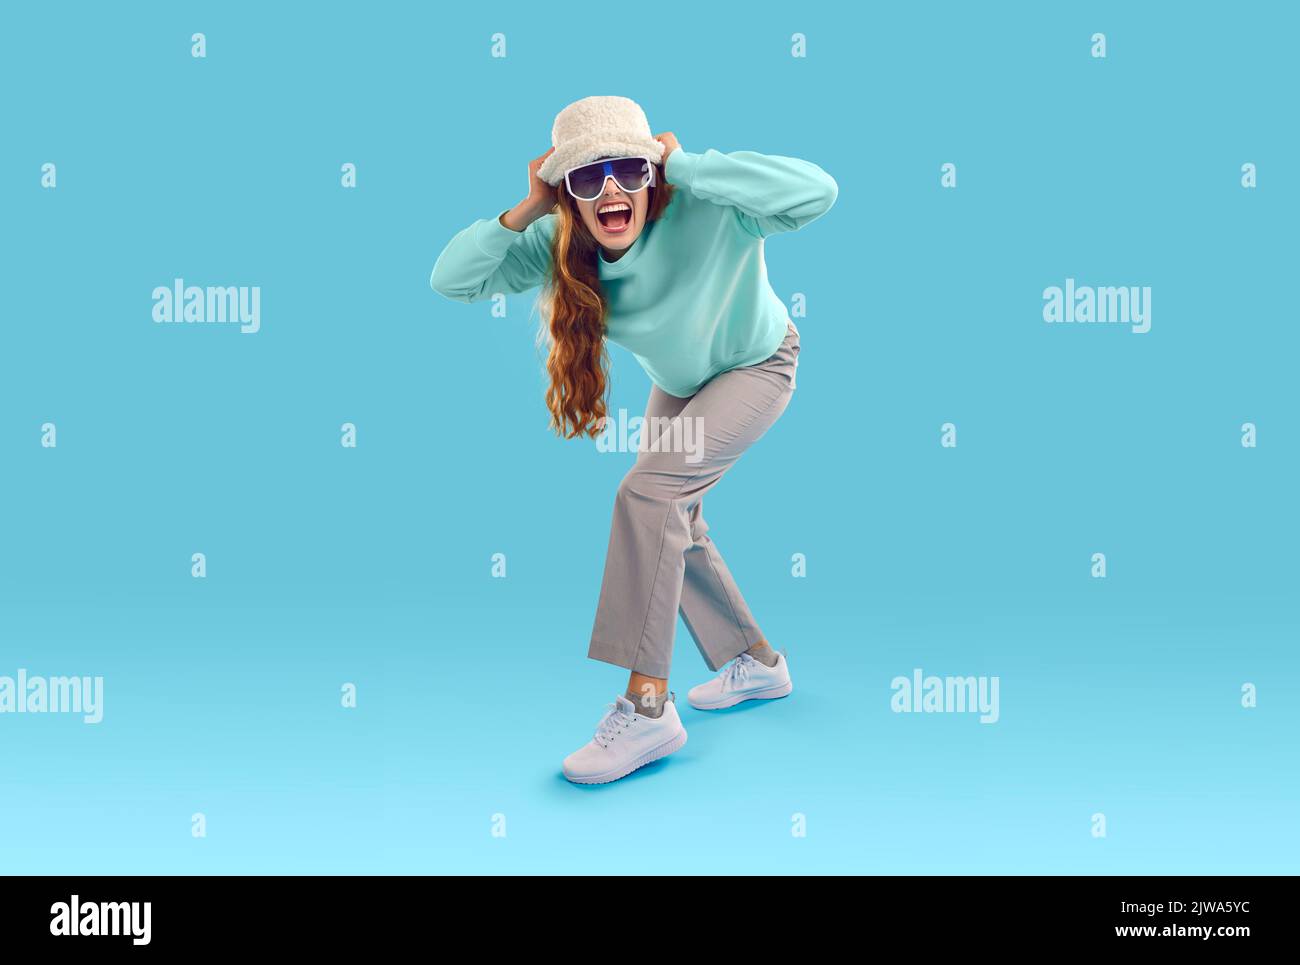 Funny, excited woman in hat and sunglasses standing on blue studio background and screaming Stock Photo